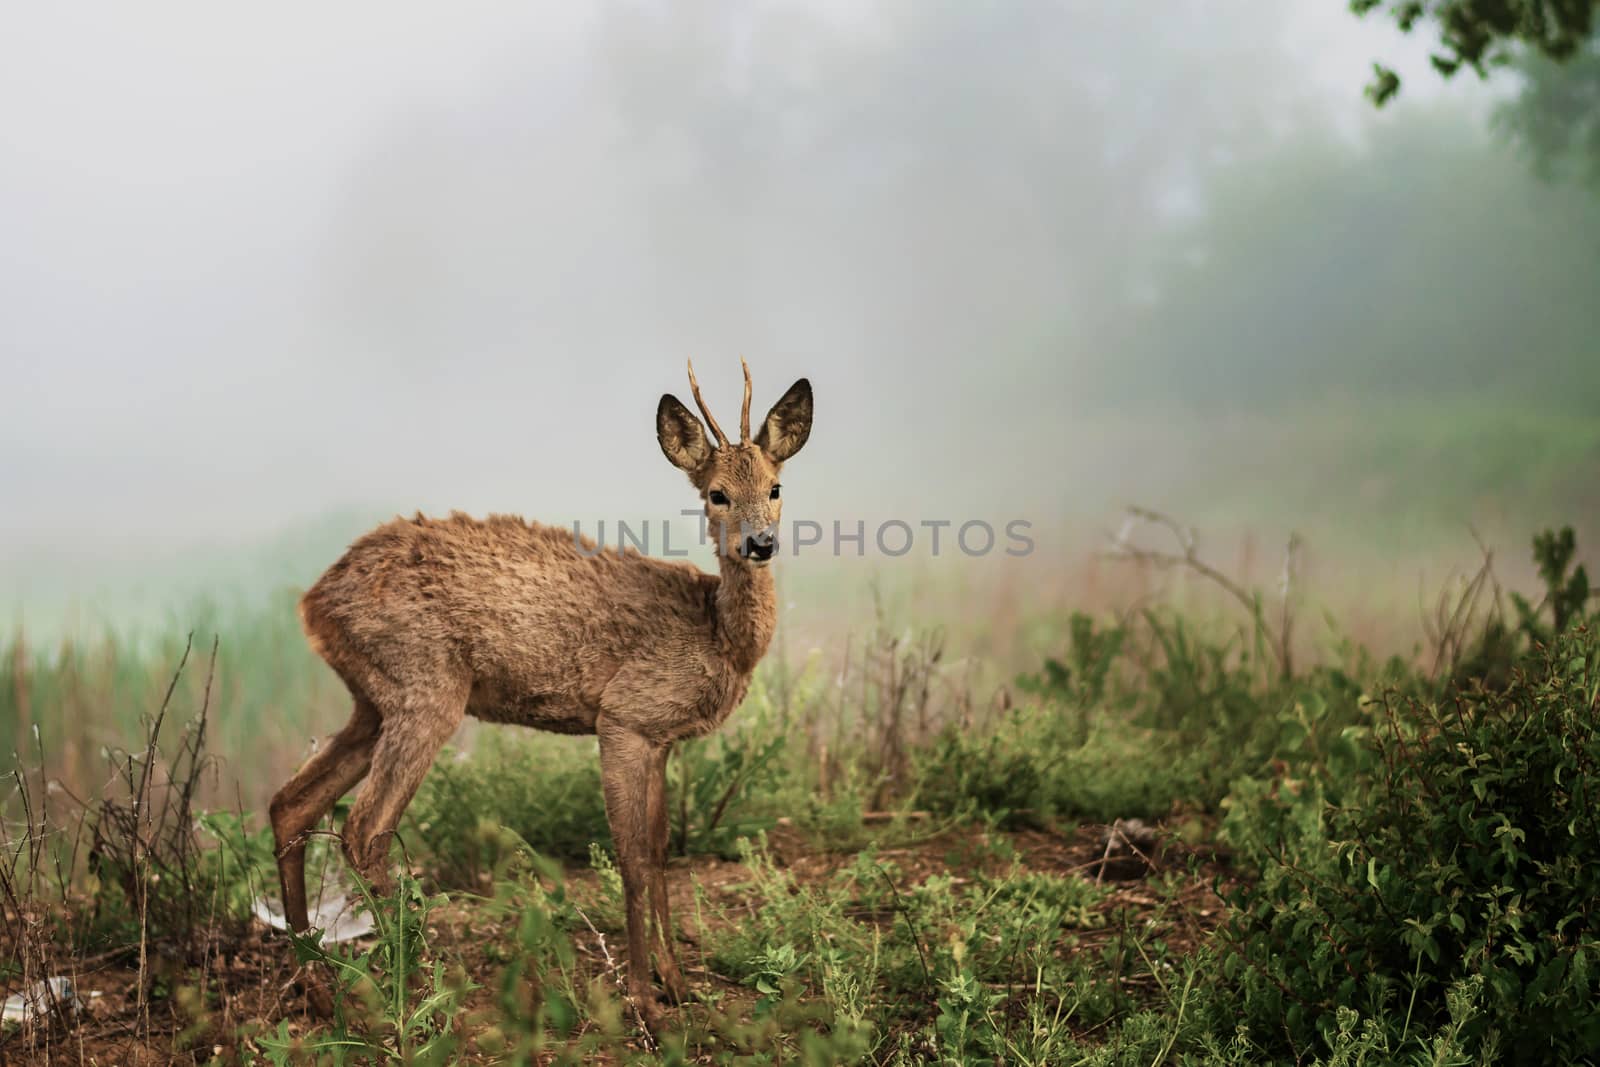 A young roebuck on the shore of a pond at a foggy morning.